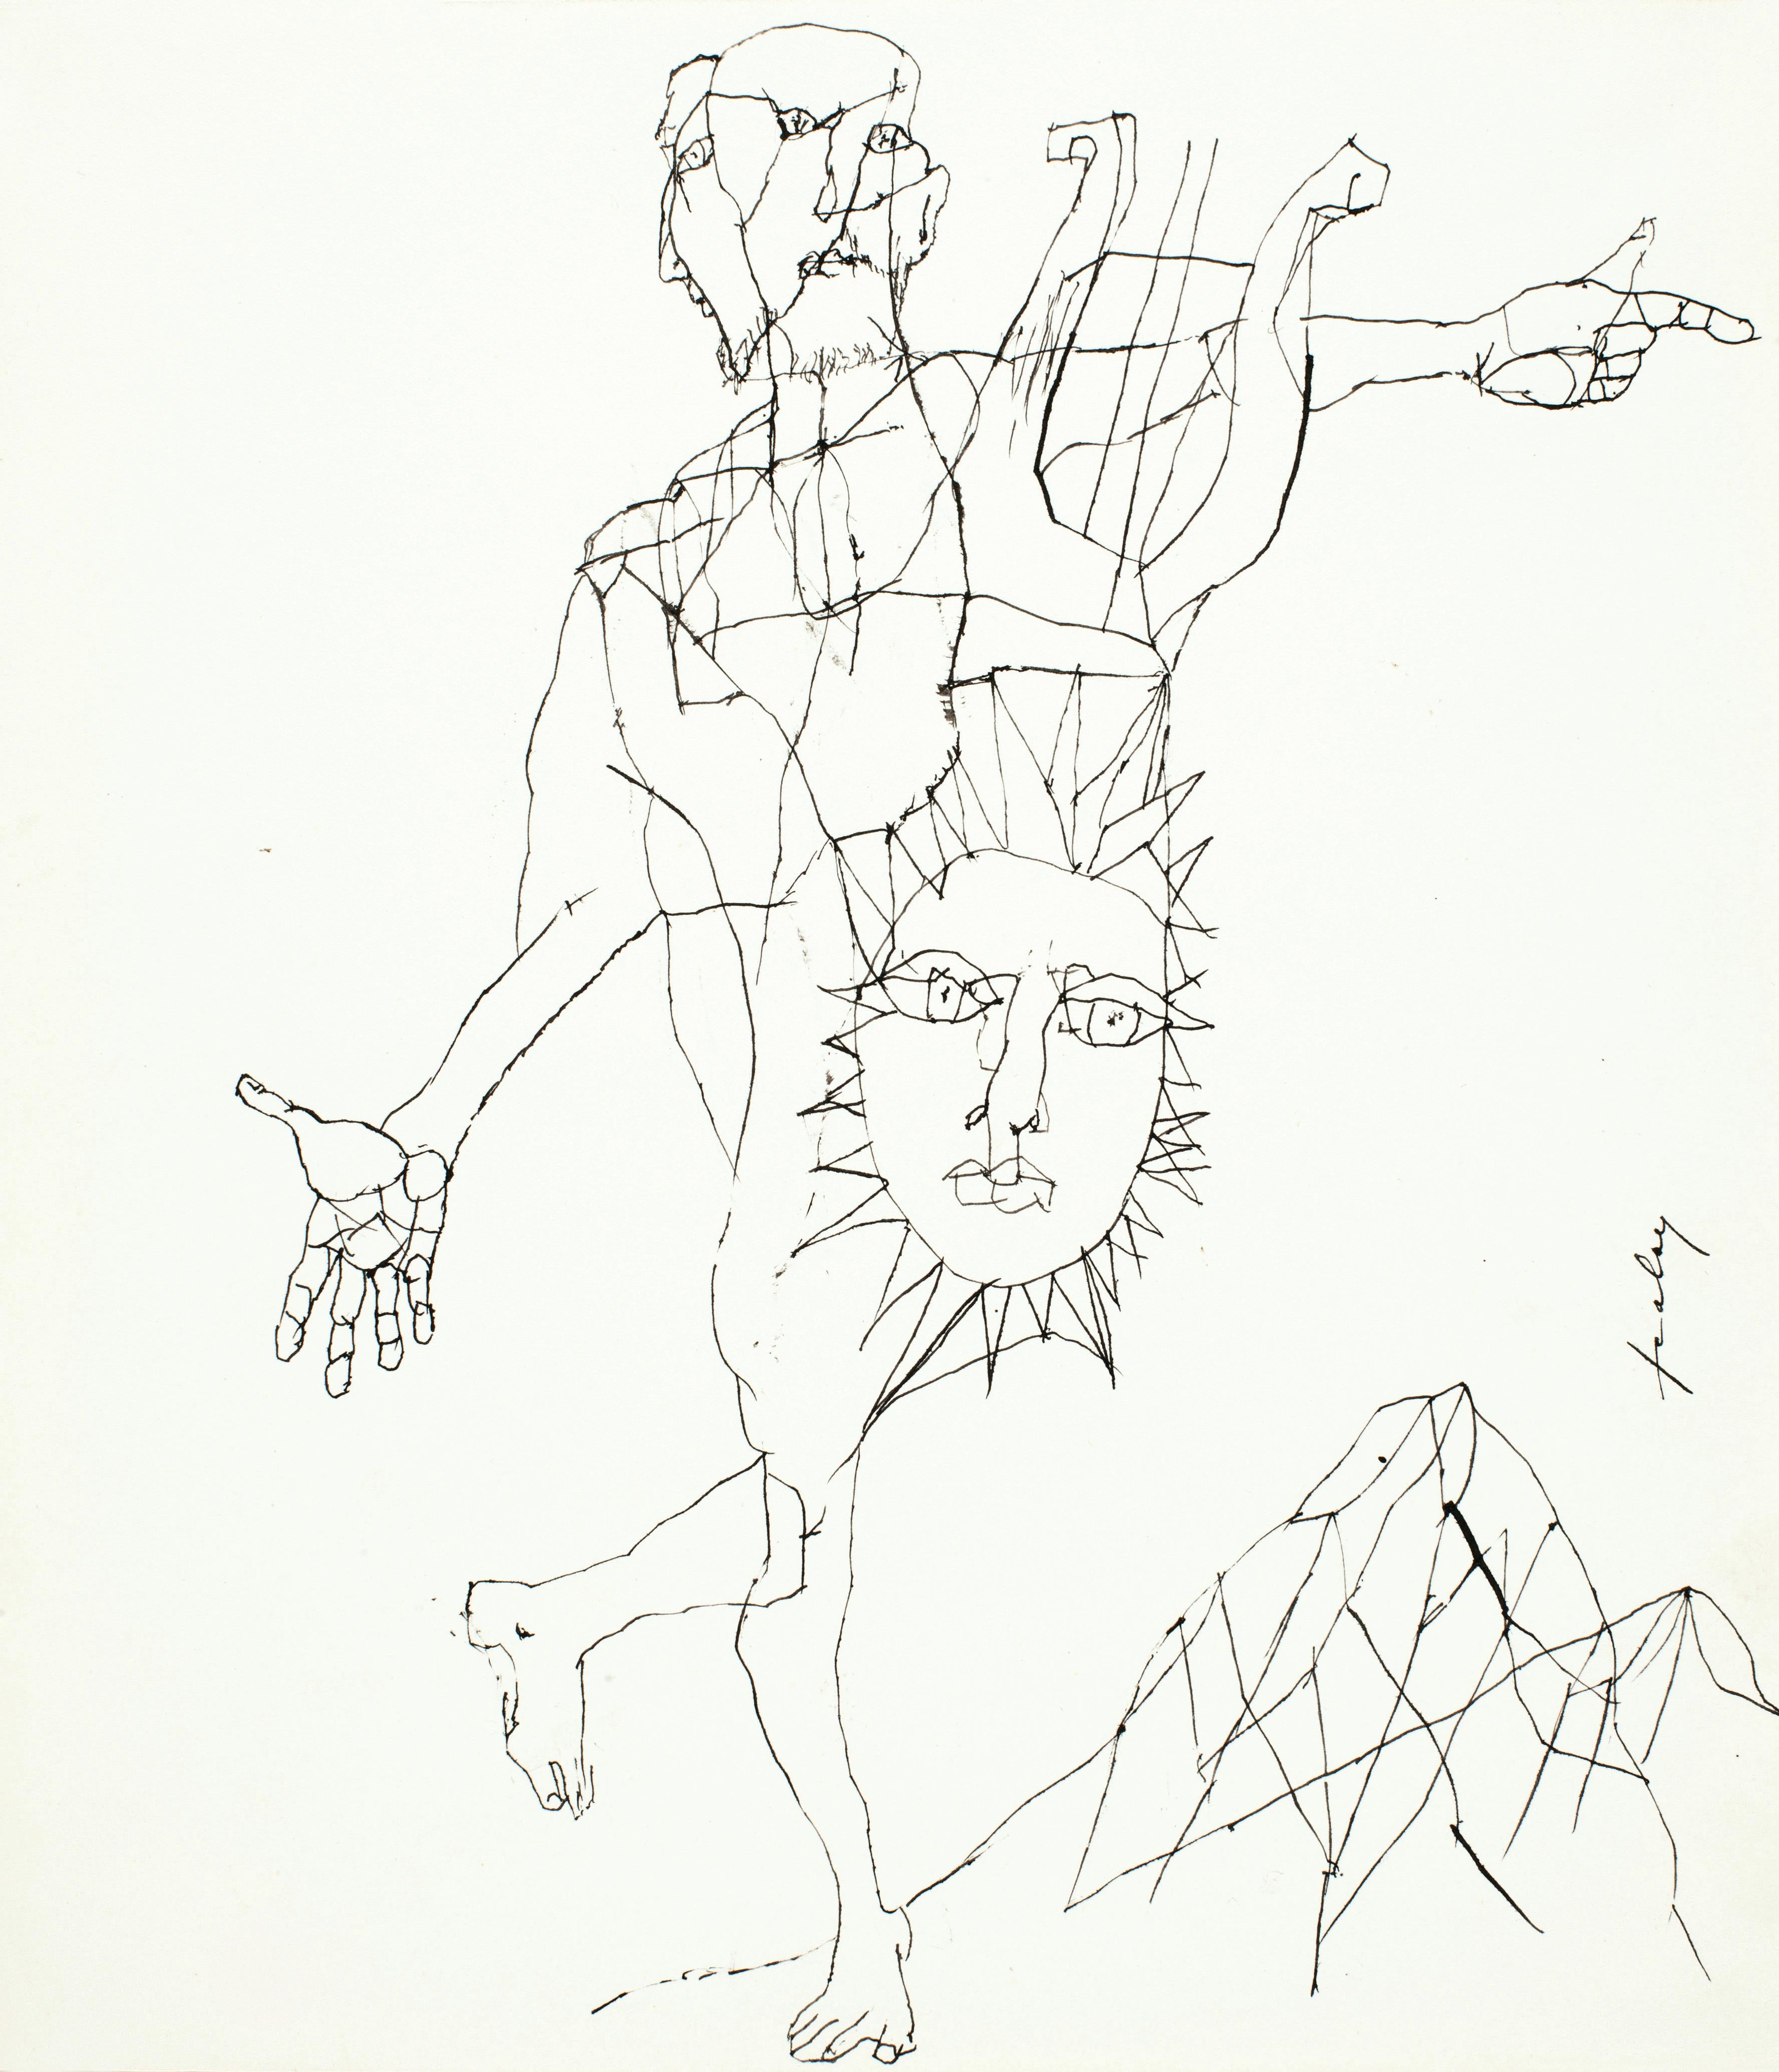 Odes to the sun - Lajos Szalay, 20th Century, Figurative drawing